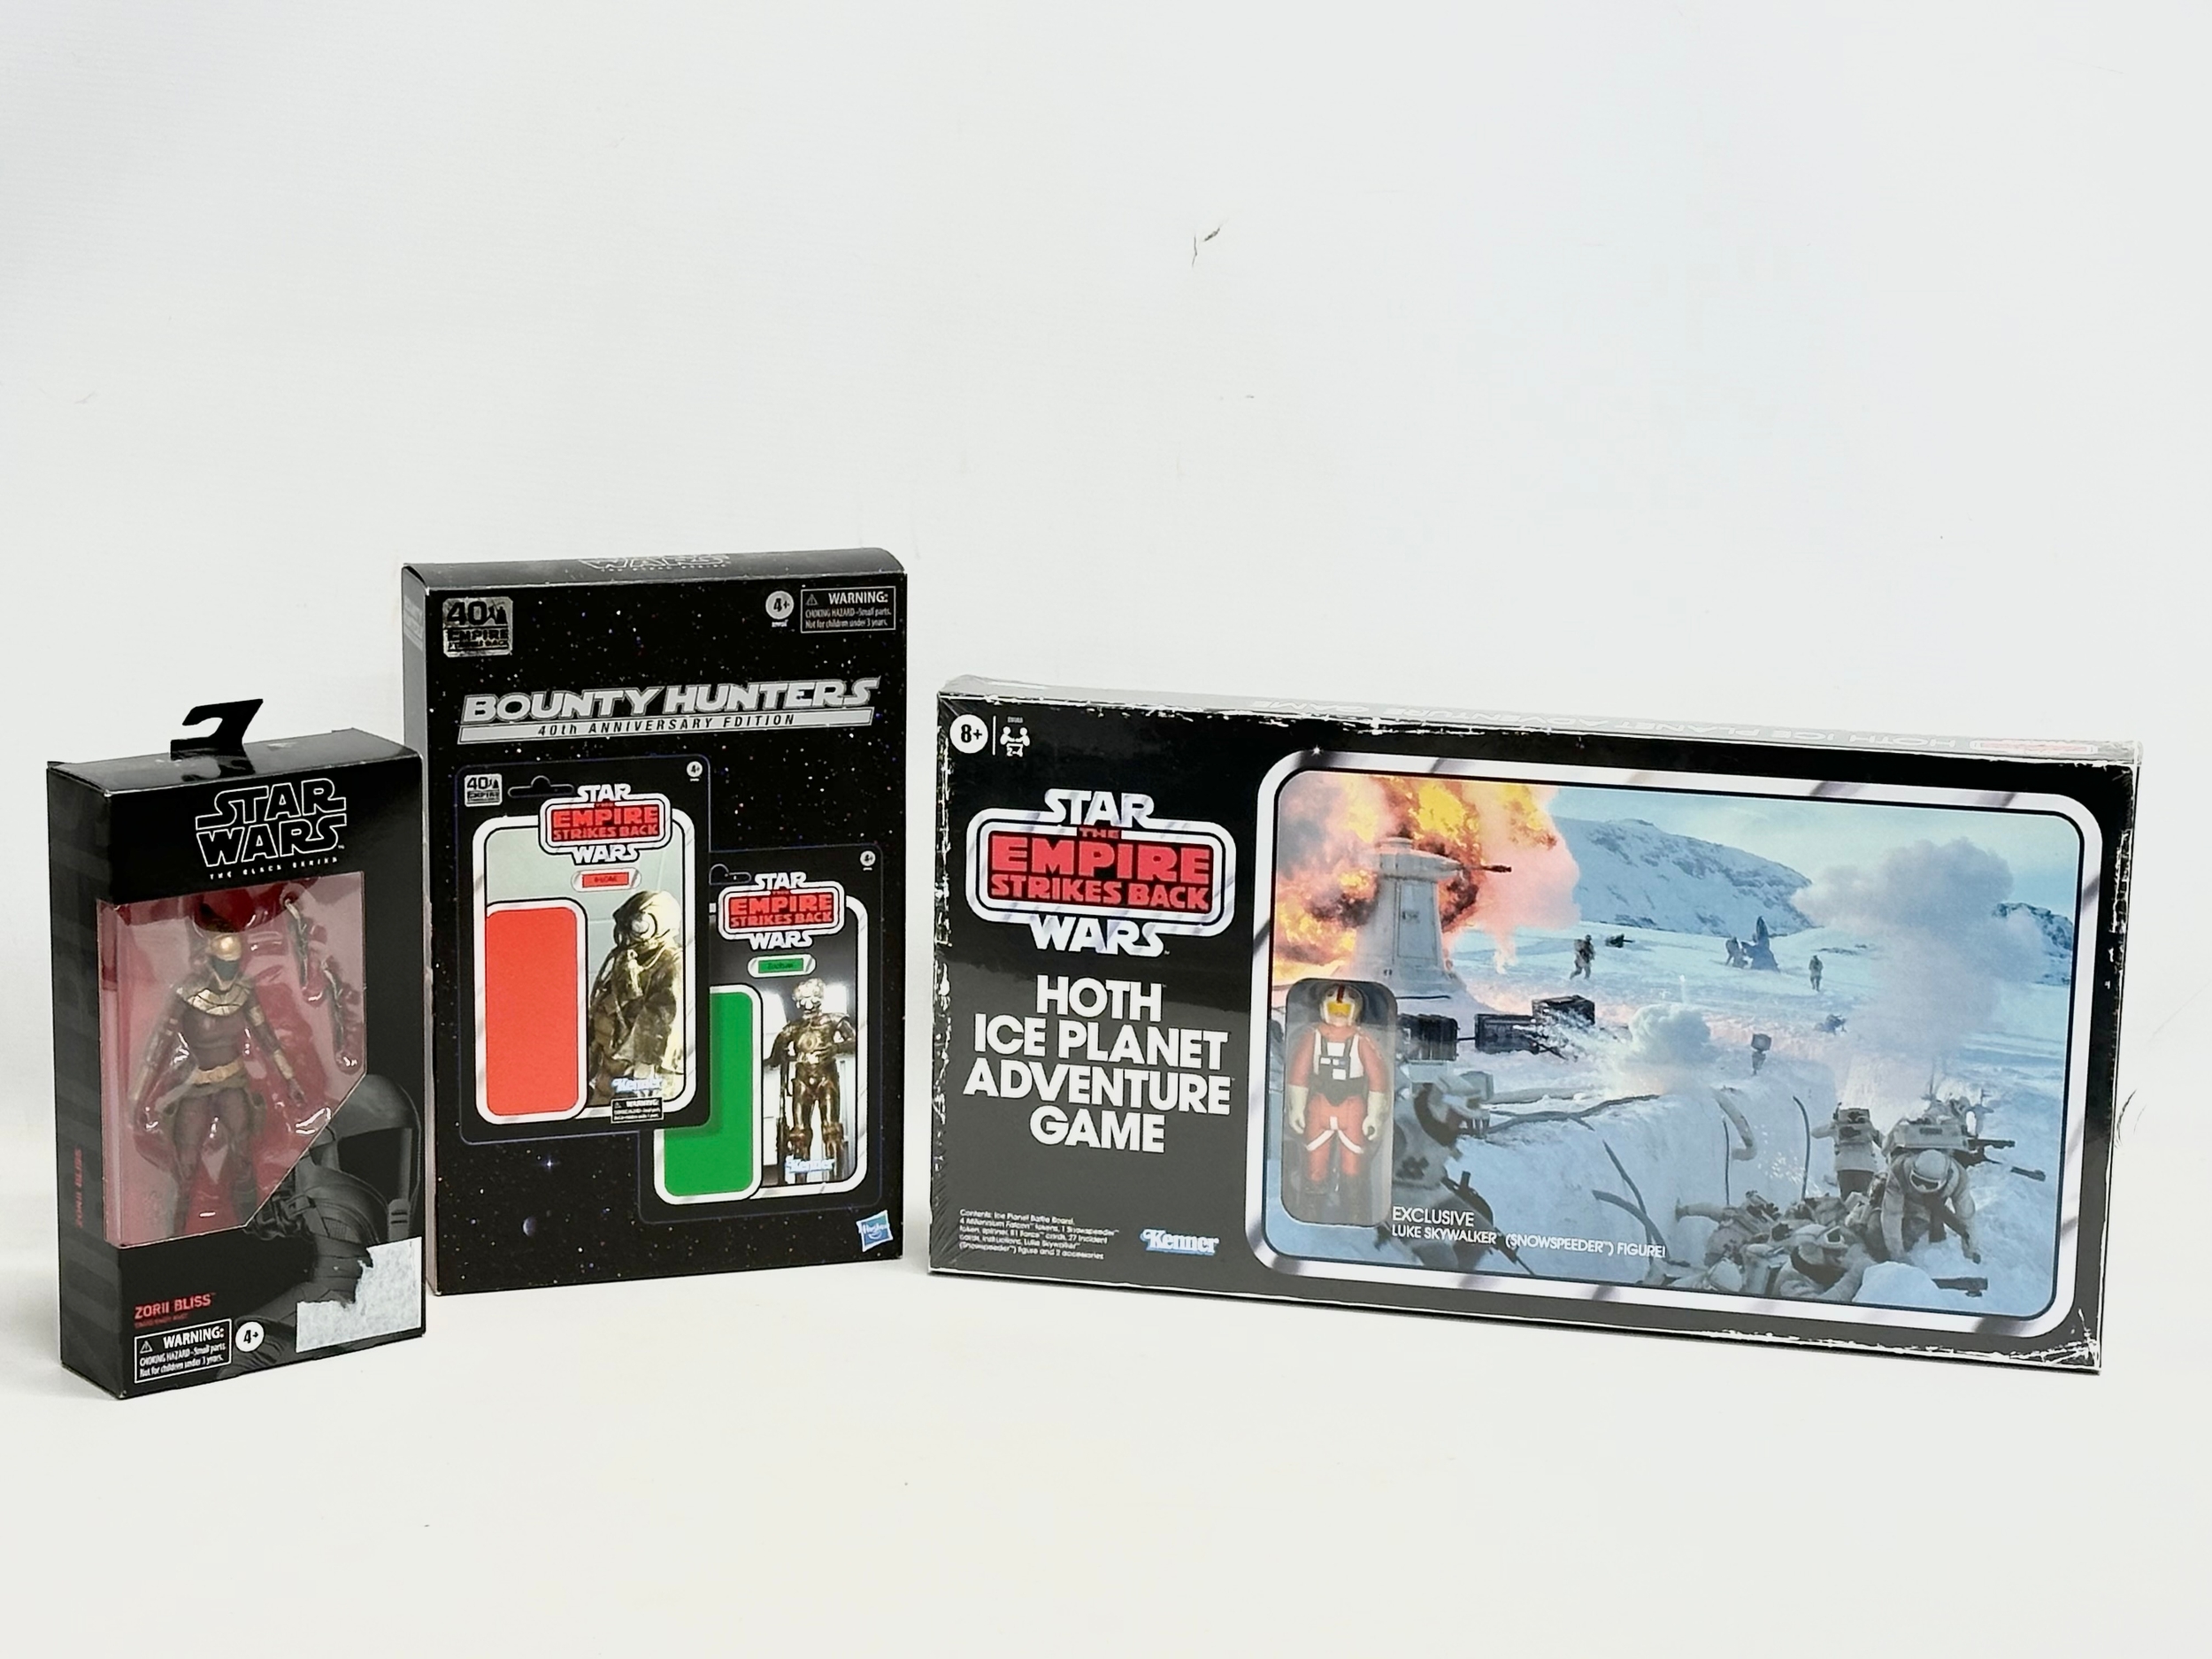 Star Wars toys. A unopened Kenner Star Wars Empire Strikes Back Hoth Ice Planet Adventure Game. A